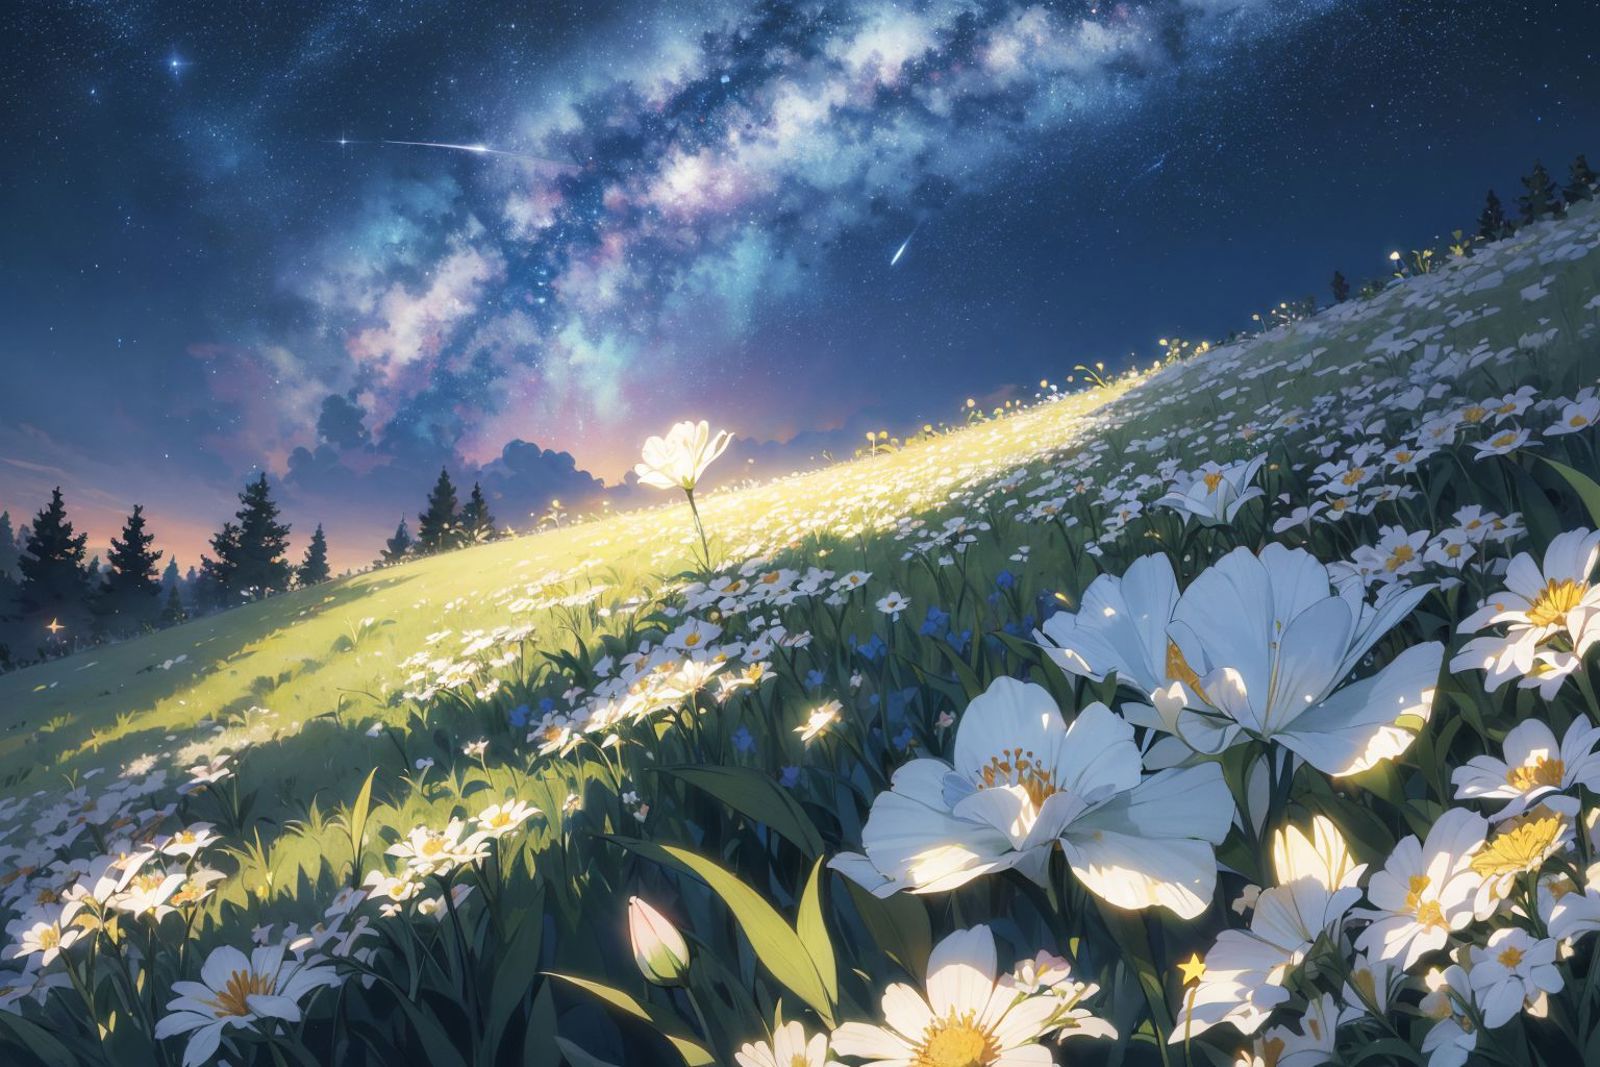 An artistic rendering of a field of flowers, stars, and a night sky.